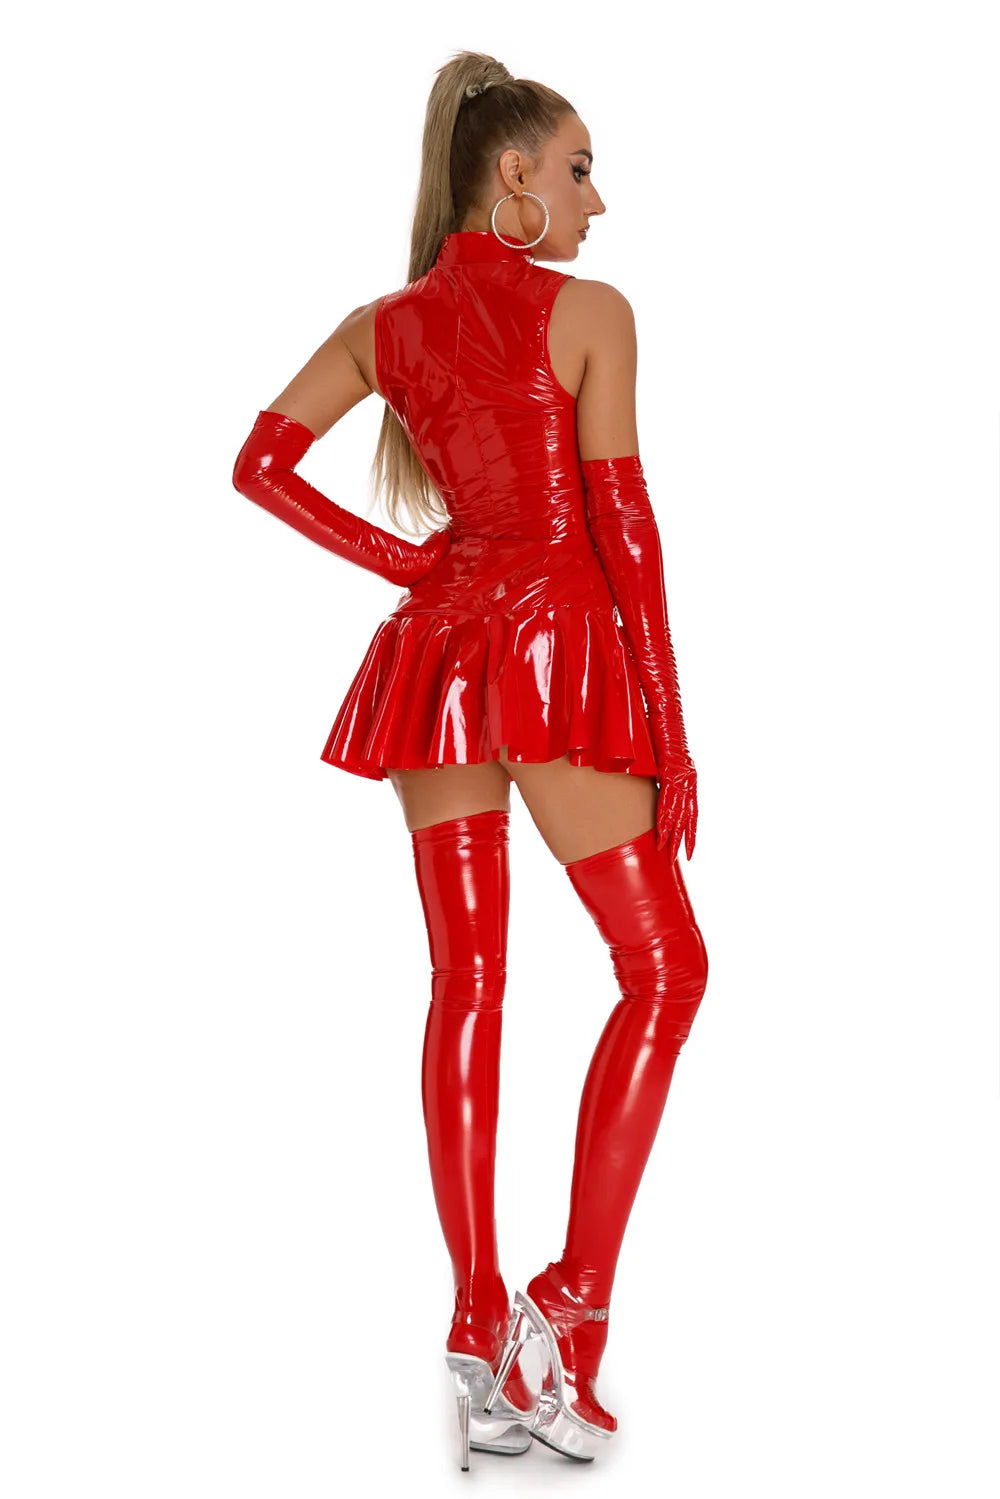 Womens Black Red Wetlook Leather Dress Pole Dance Raves Party Outfit Zipper Stand Collar  Glossy Latex Slim Mini Pleated Dress